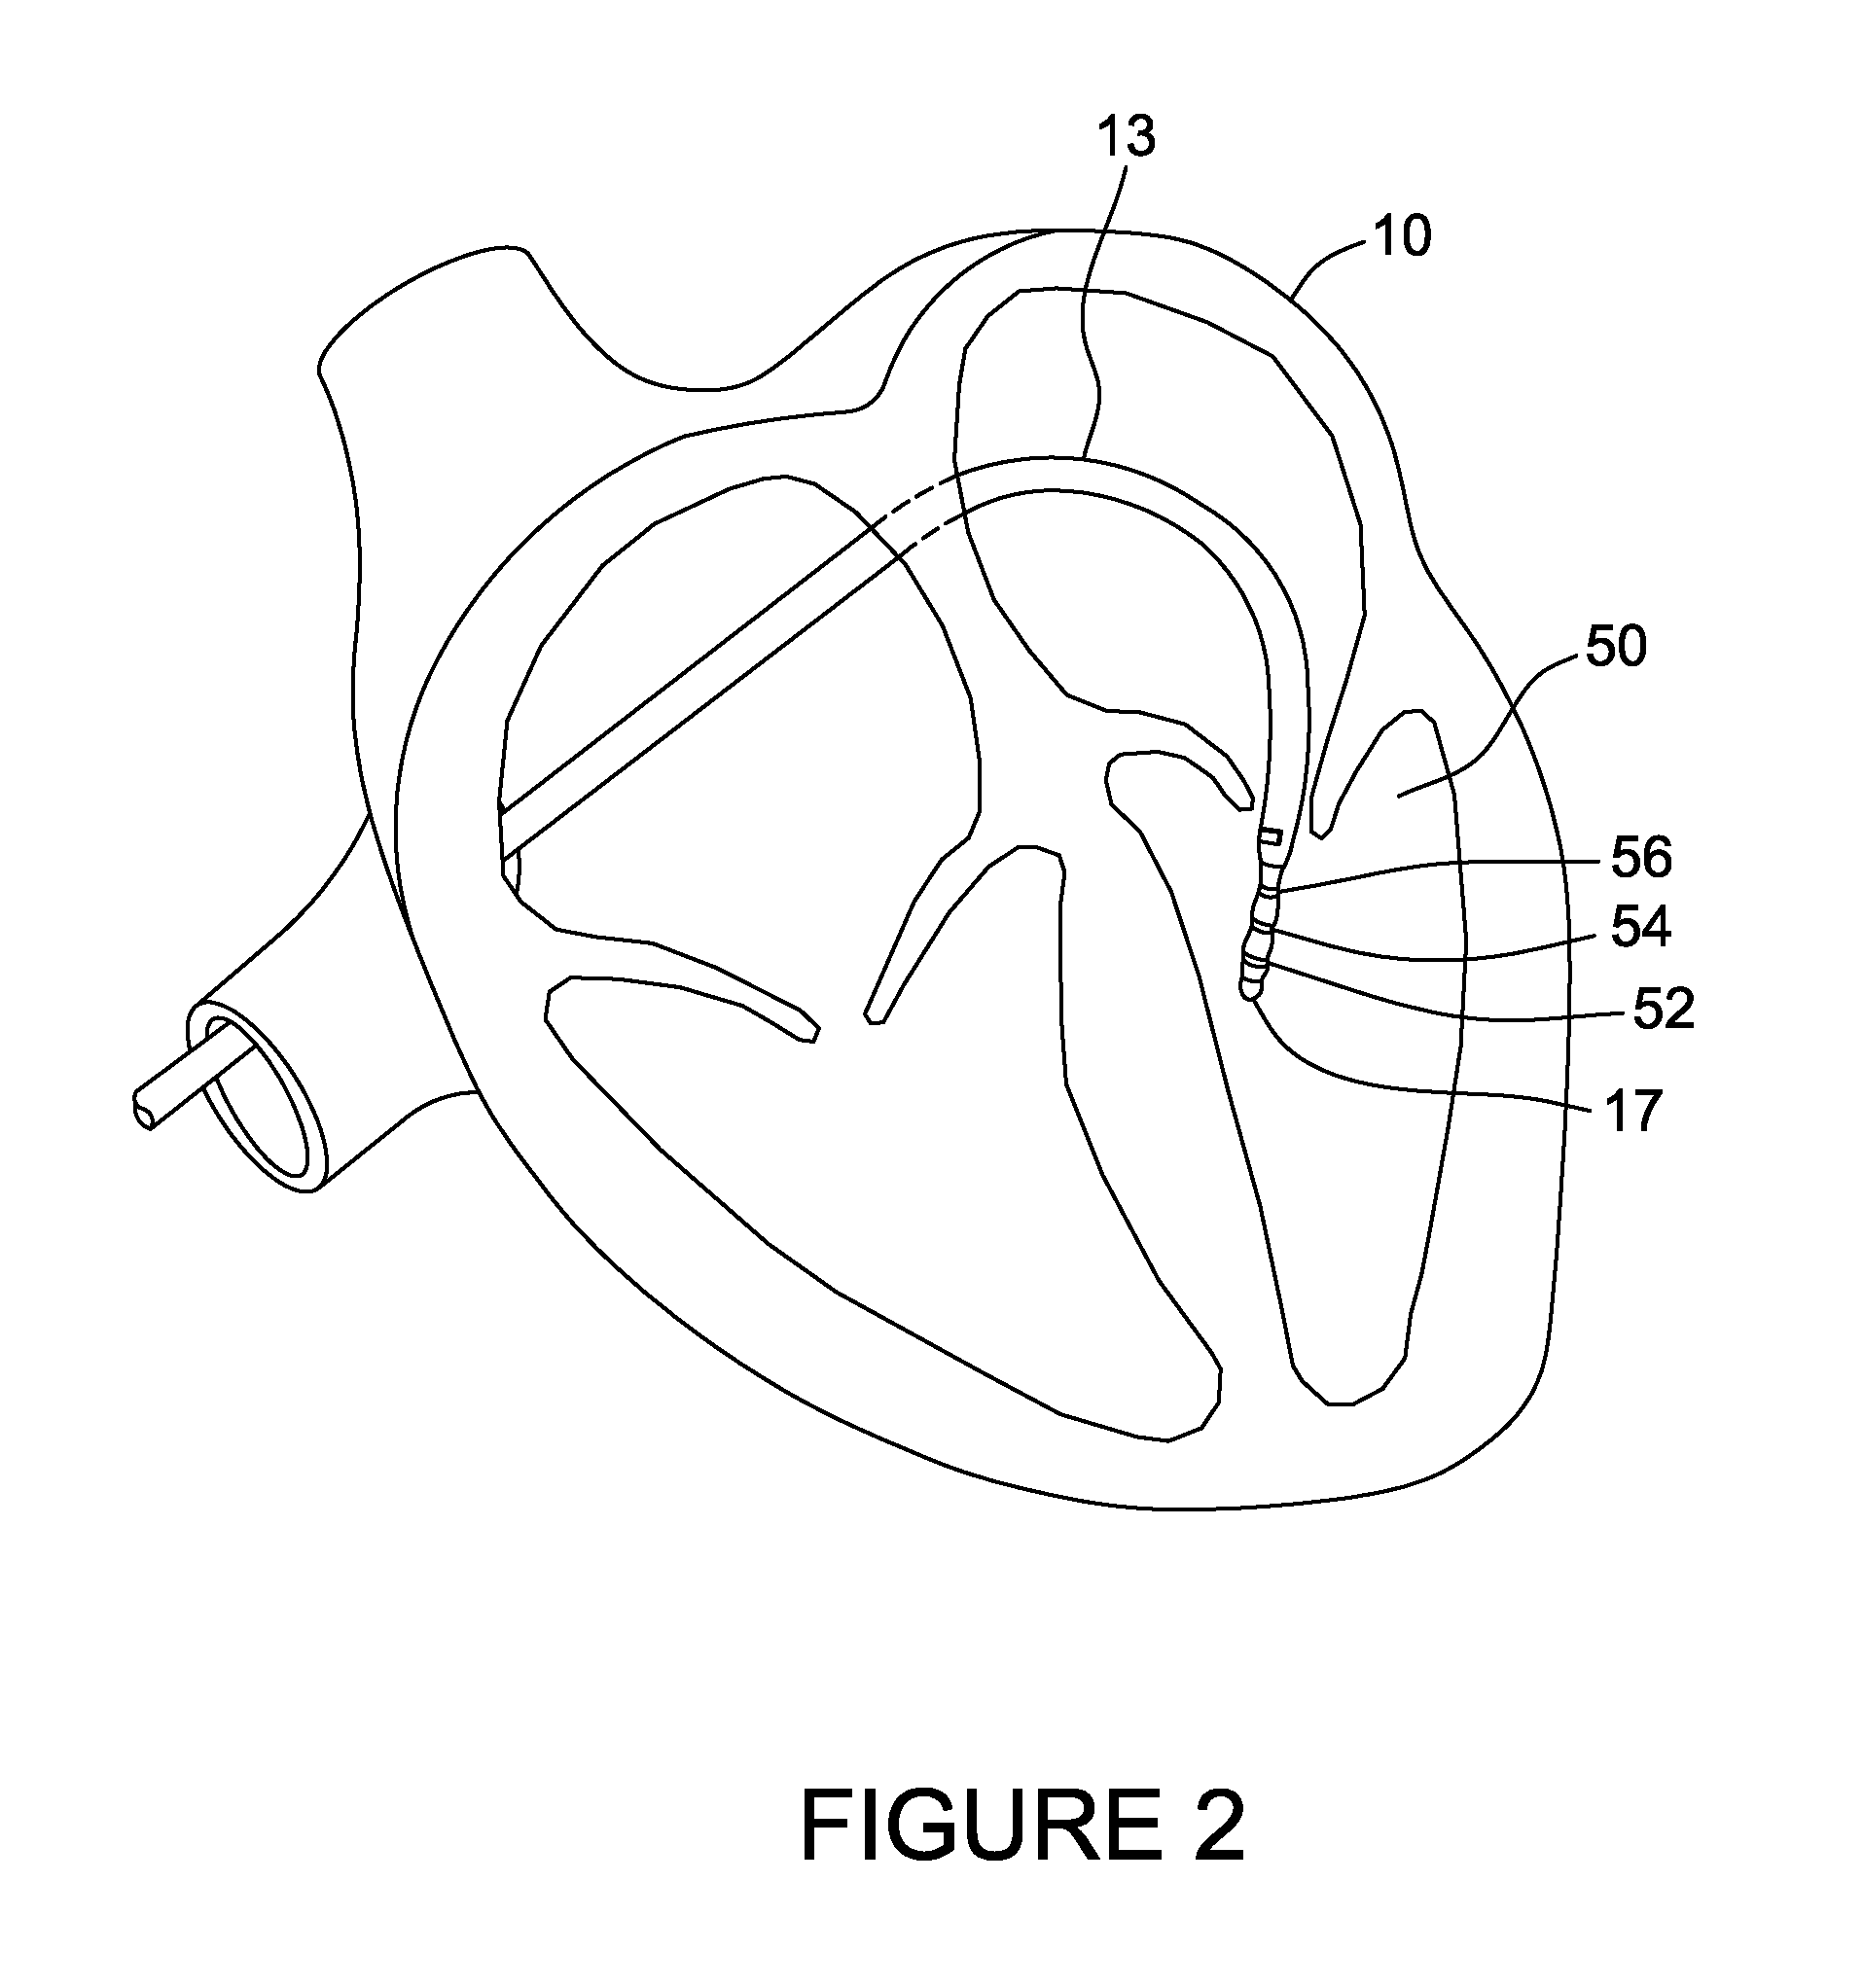 Cardiac Mapping System And Method For Bi-Directional Activation Detection Of Electrograms